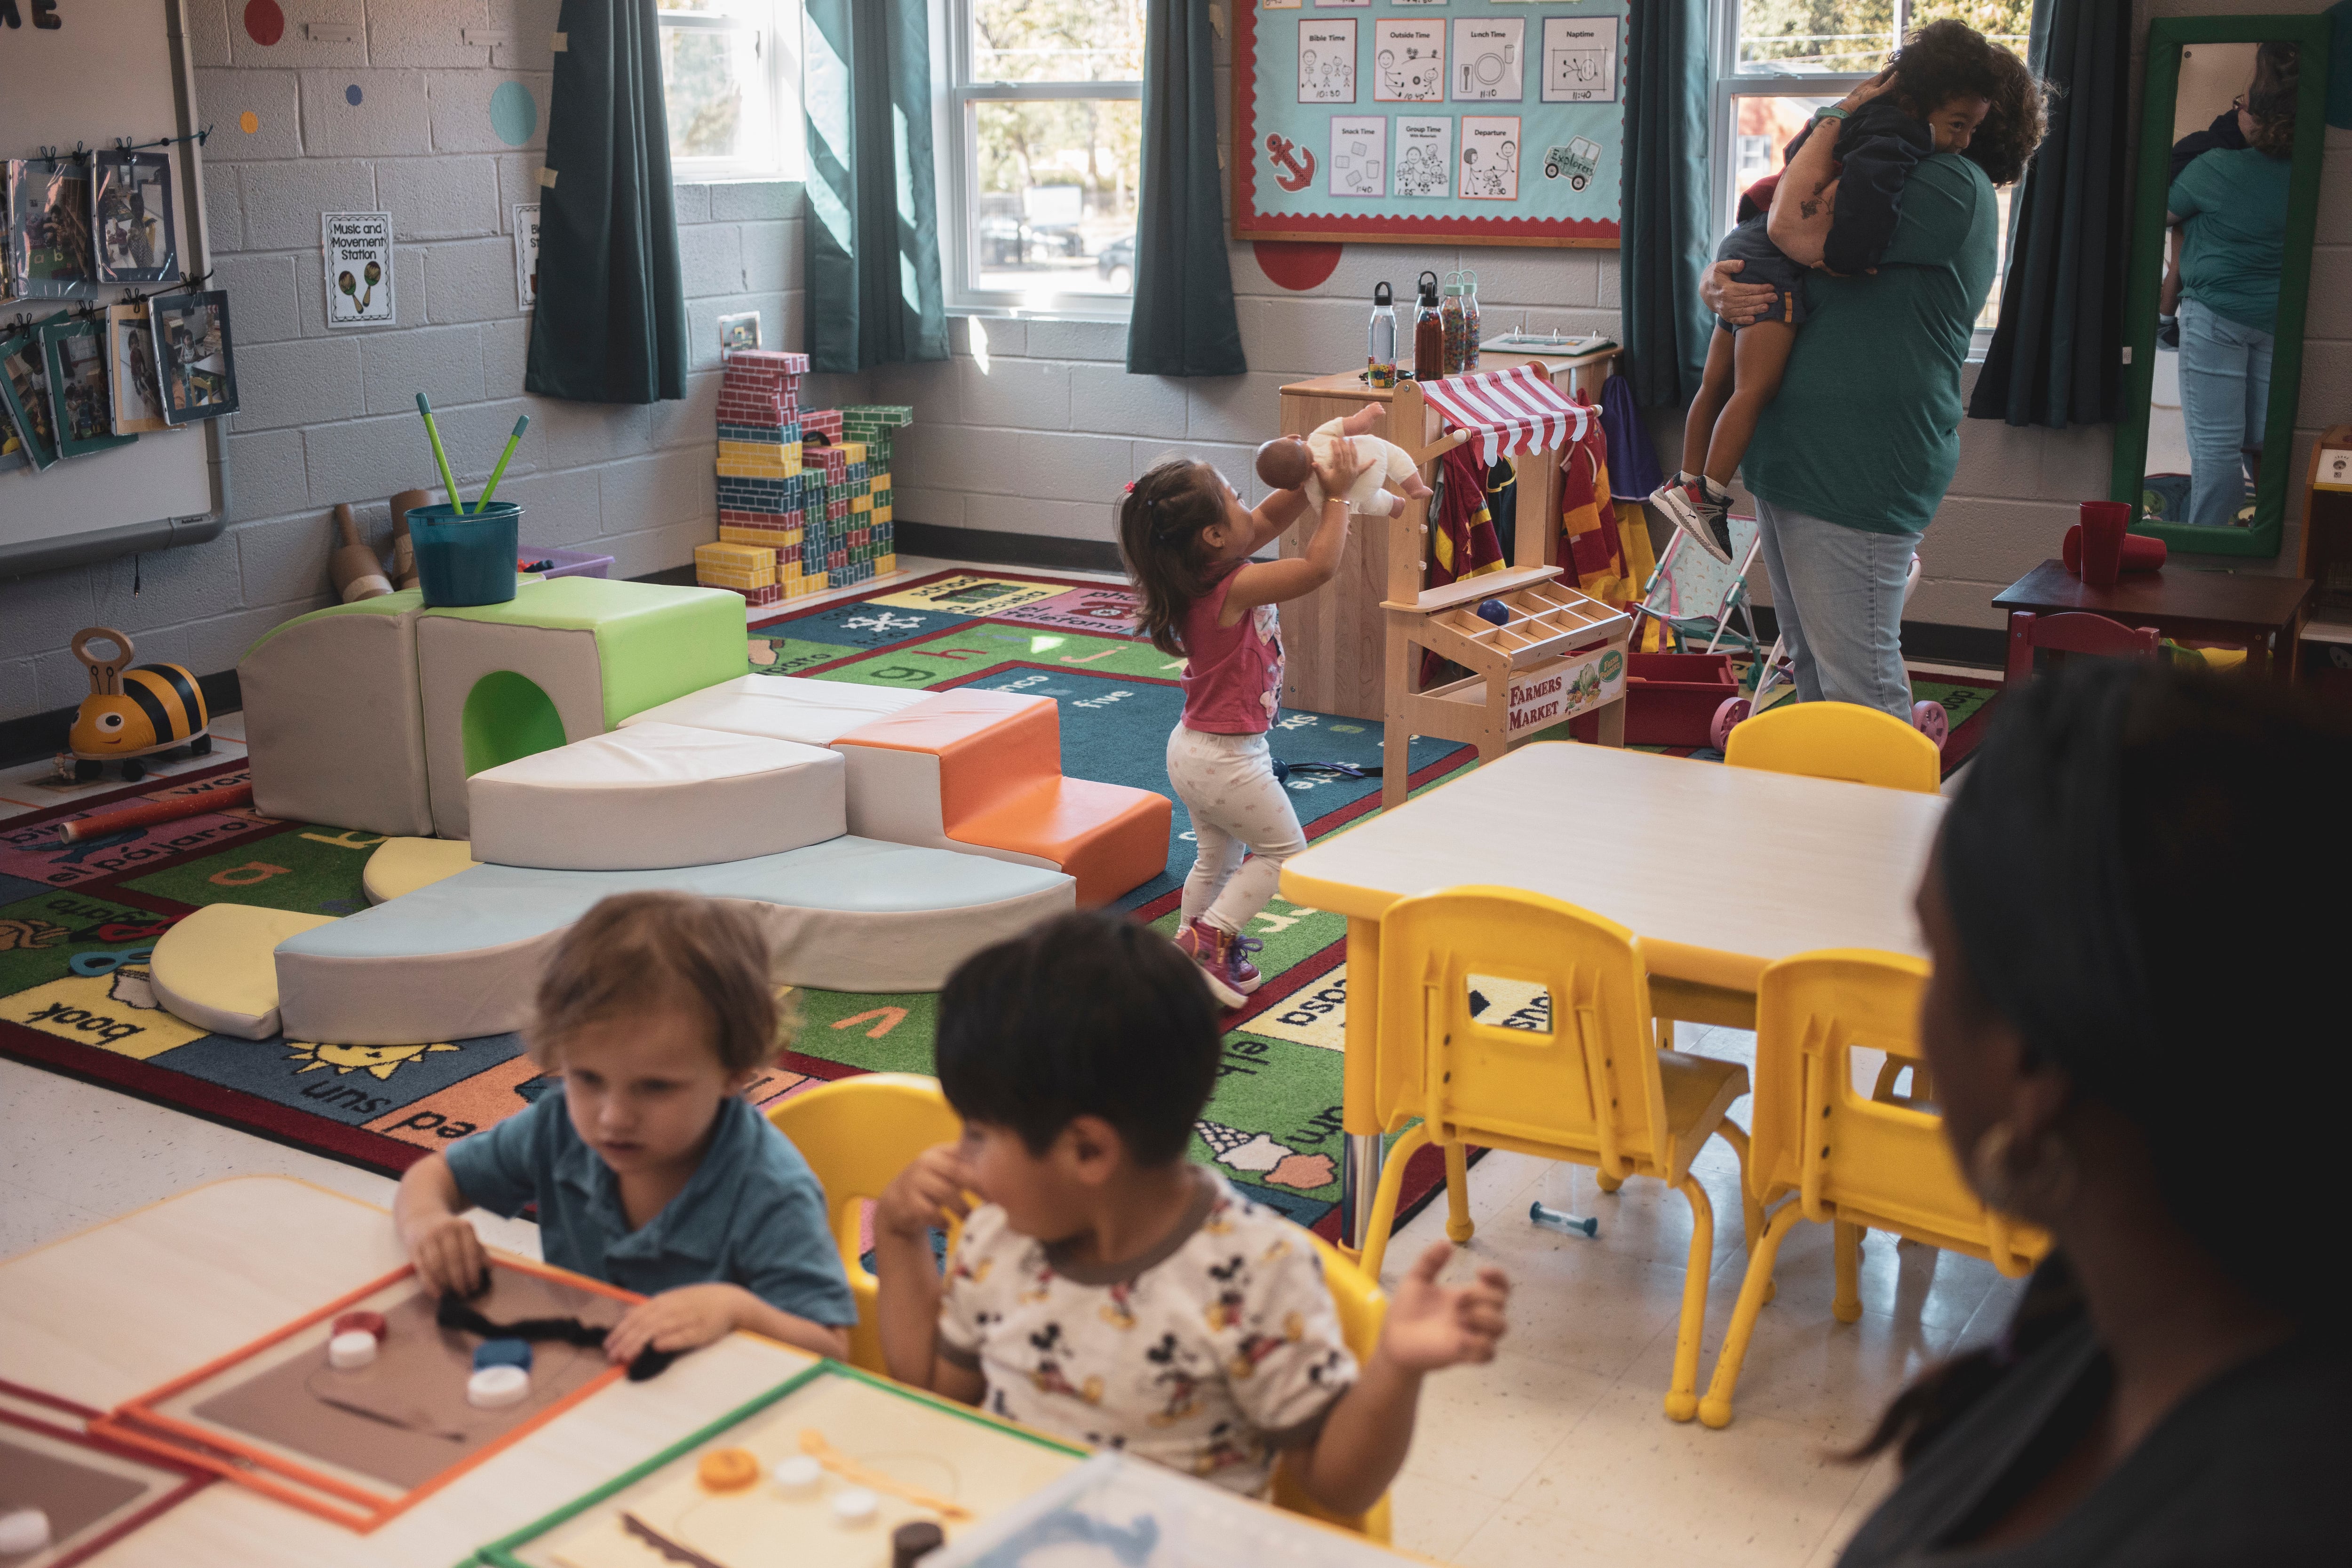 A teacher holds a child in the background of the classroom as a little girl runs up to her with a doll. Two students play together at a table in the foreground with another teacher.